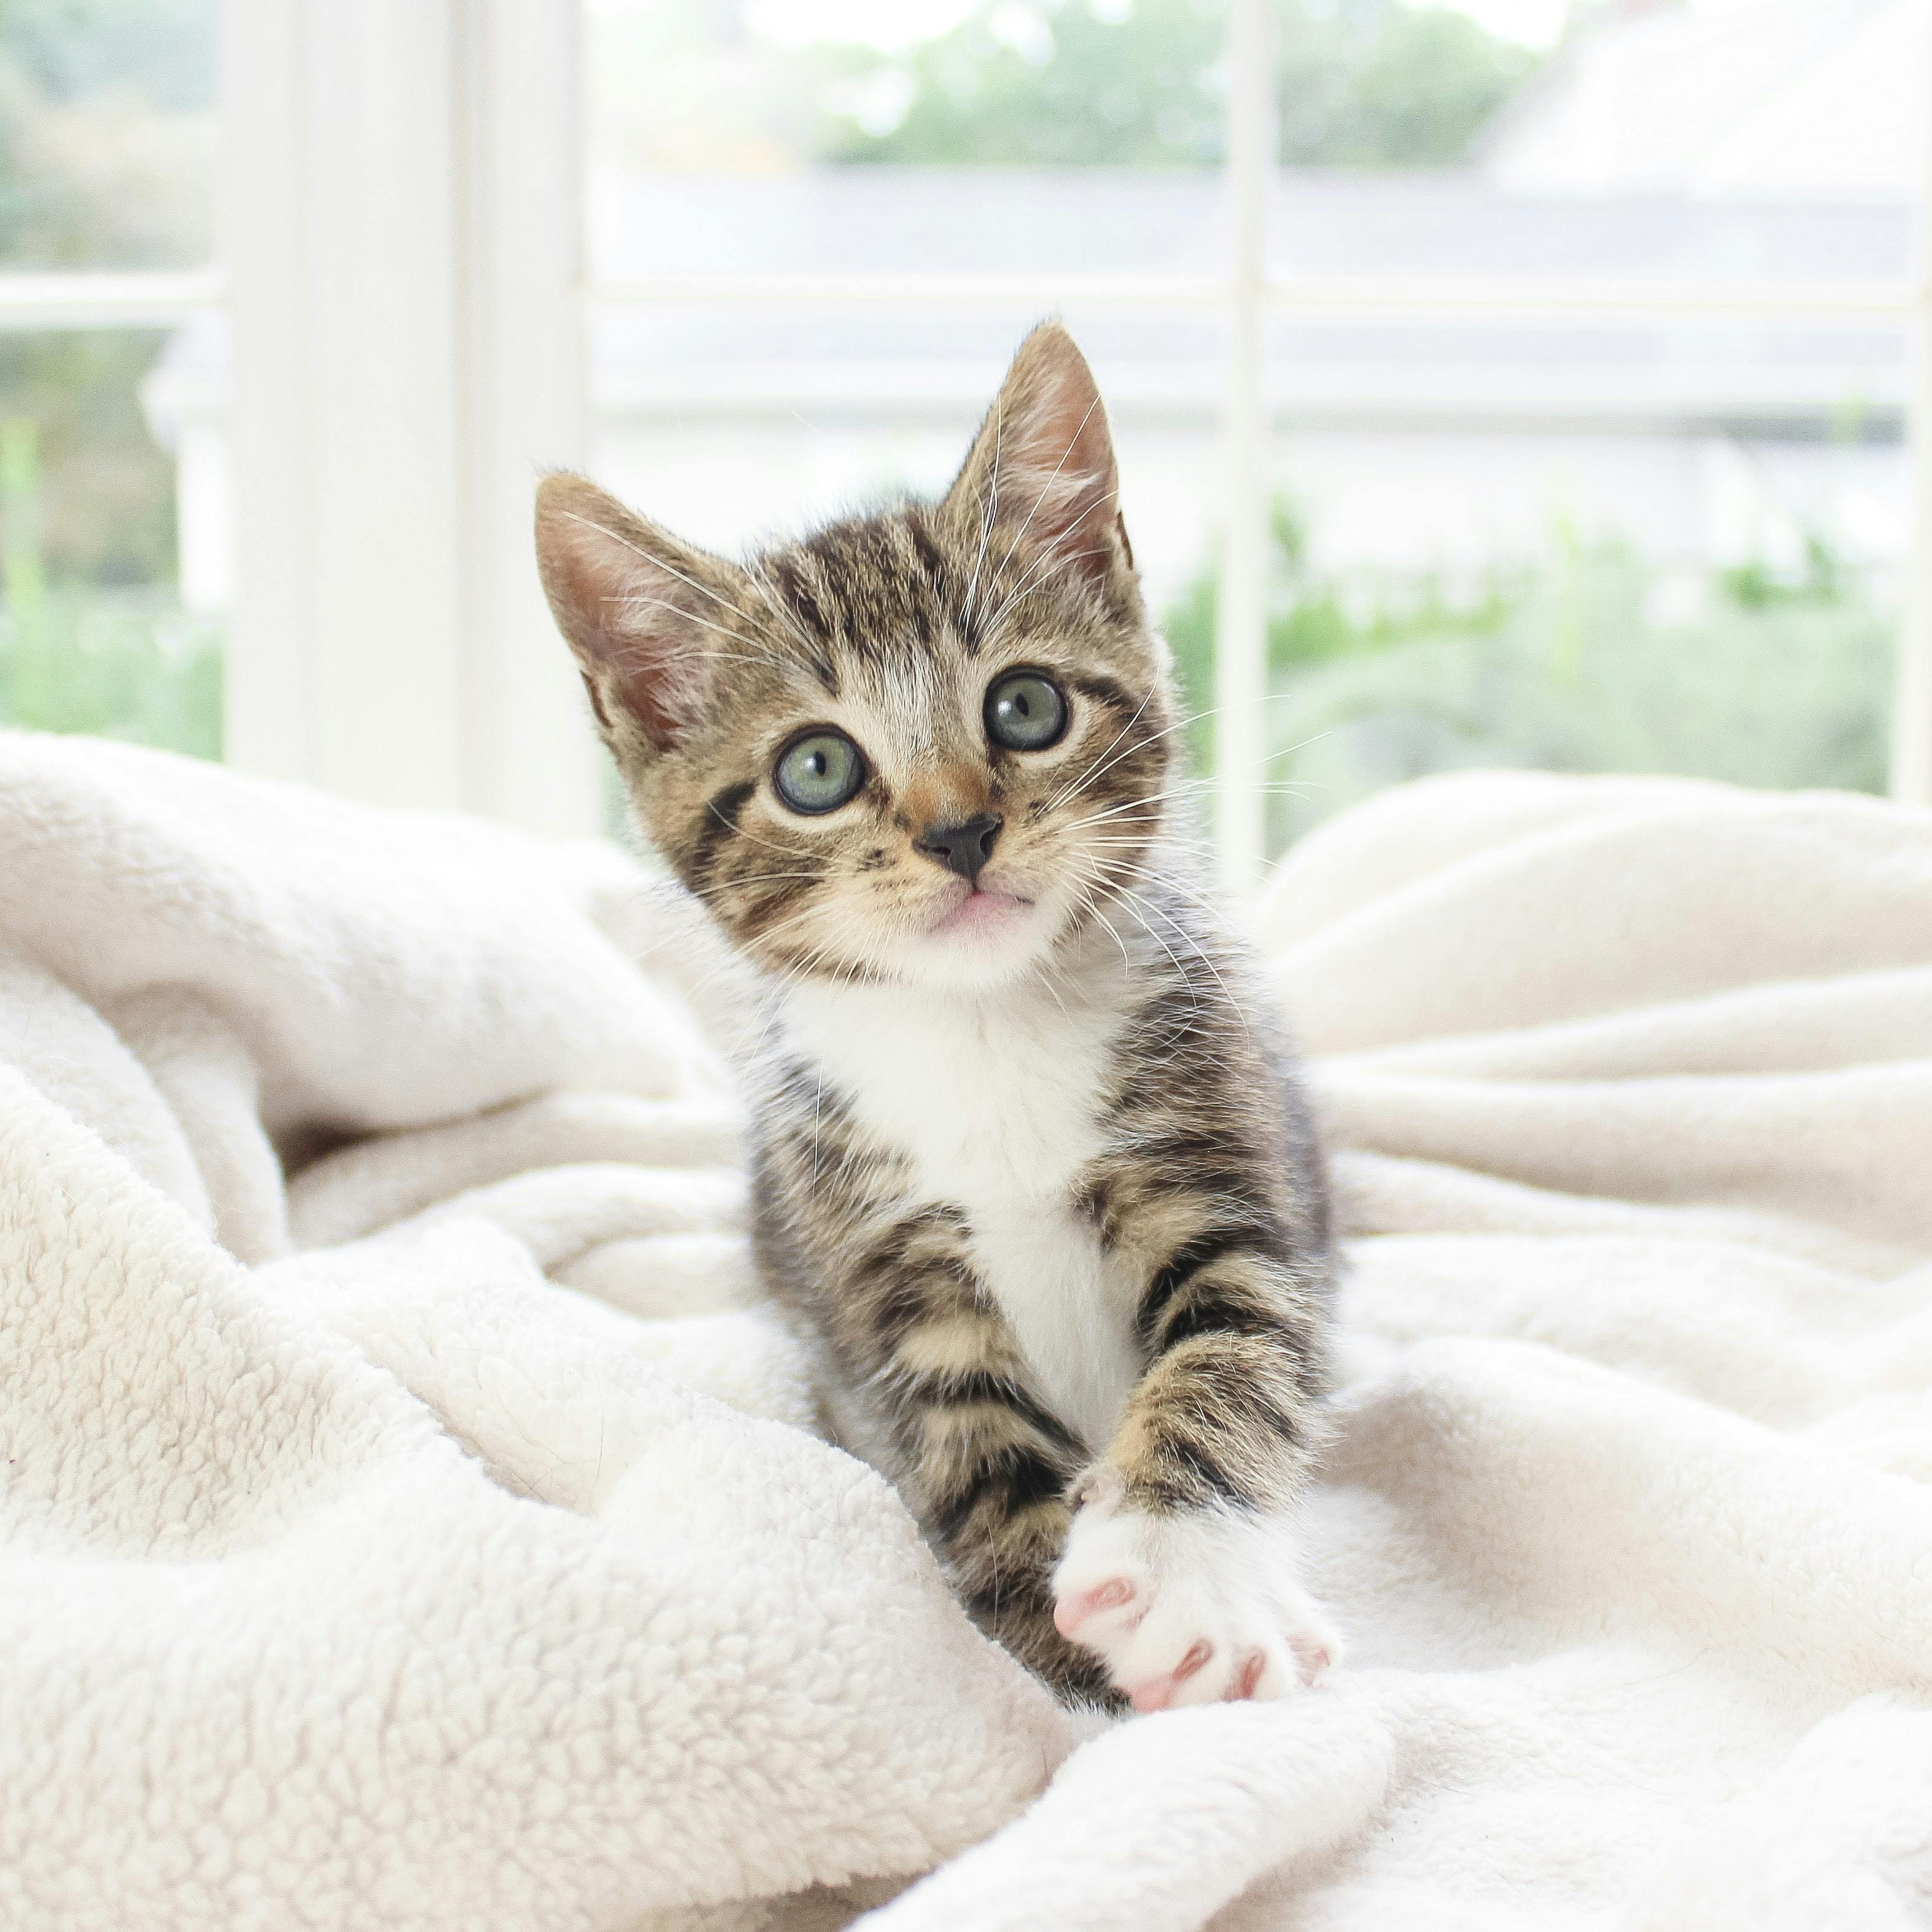 7 Tips on How to Take Care of a Kitten